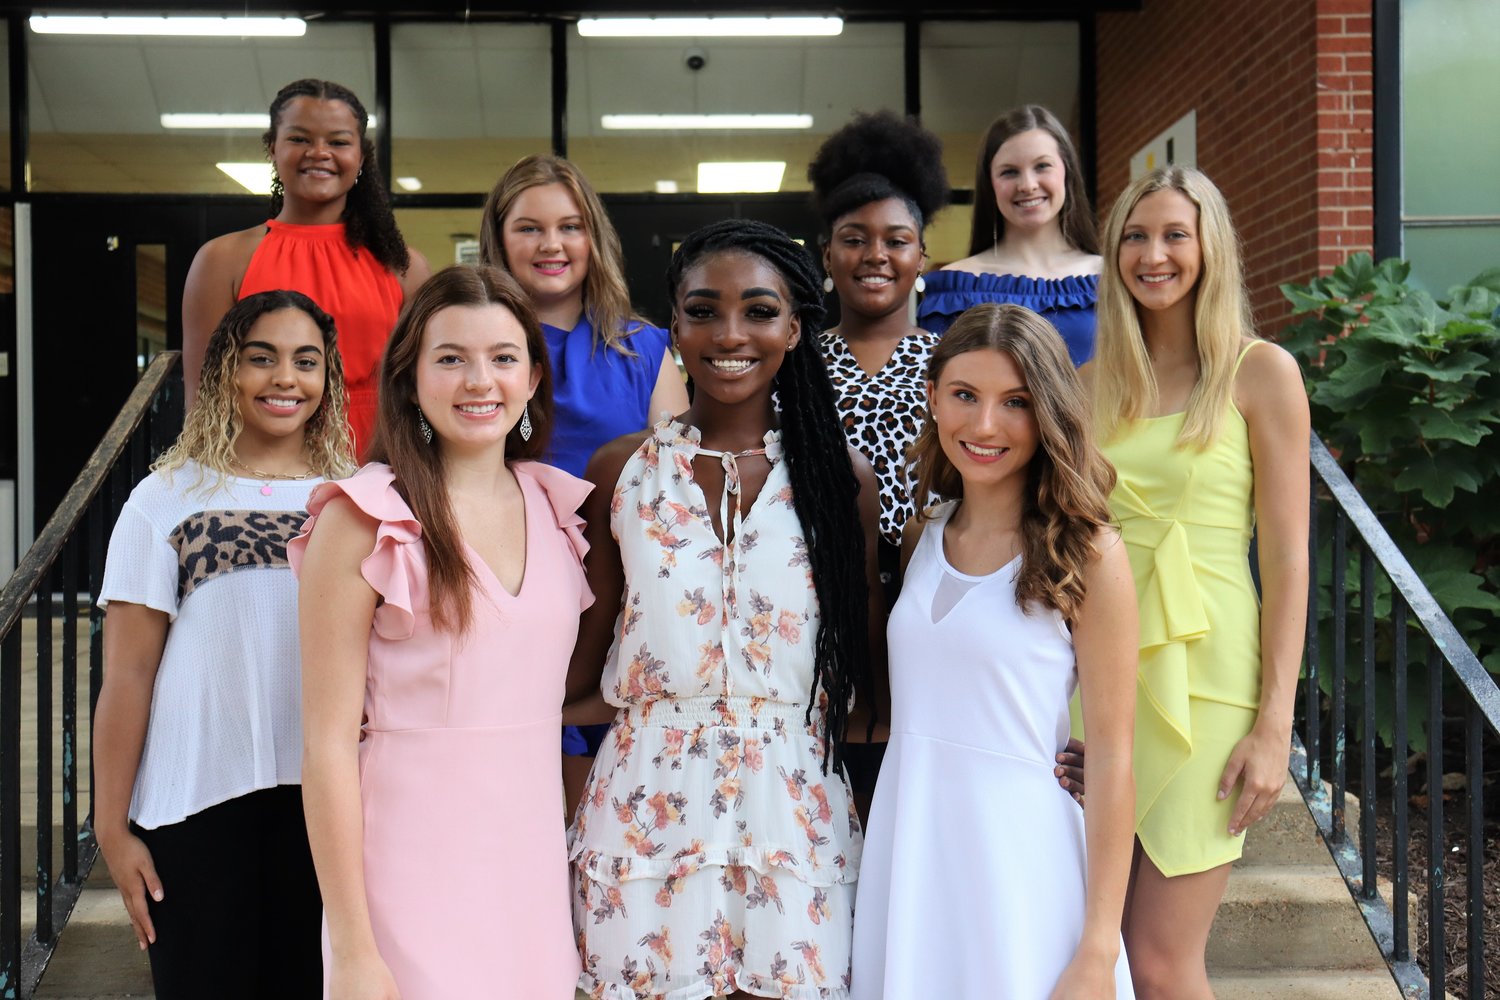 Union High School Homecoming Court named